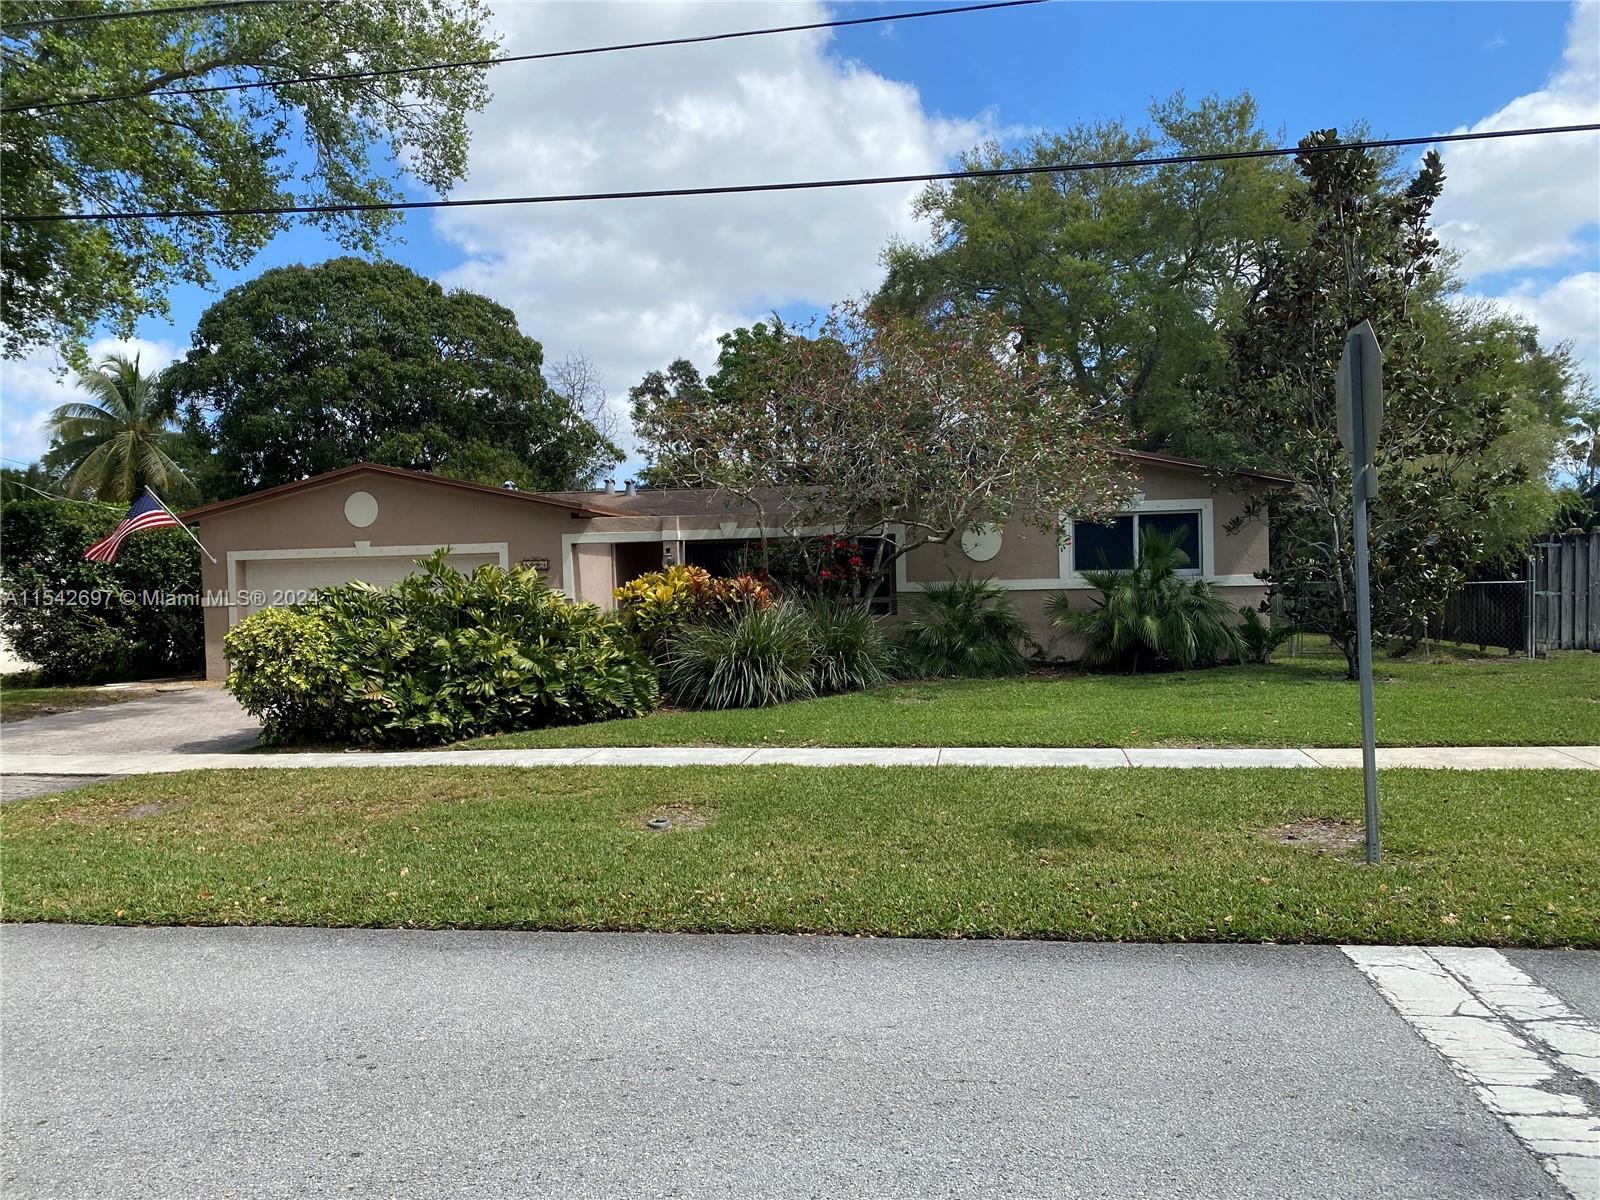 Photo of 5094 SW 88th Ter in Cooper City, FL